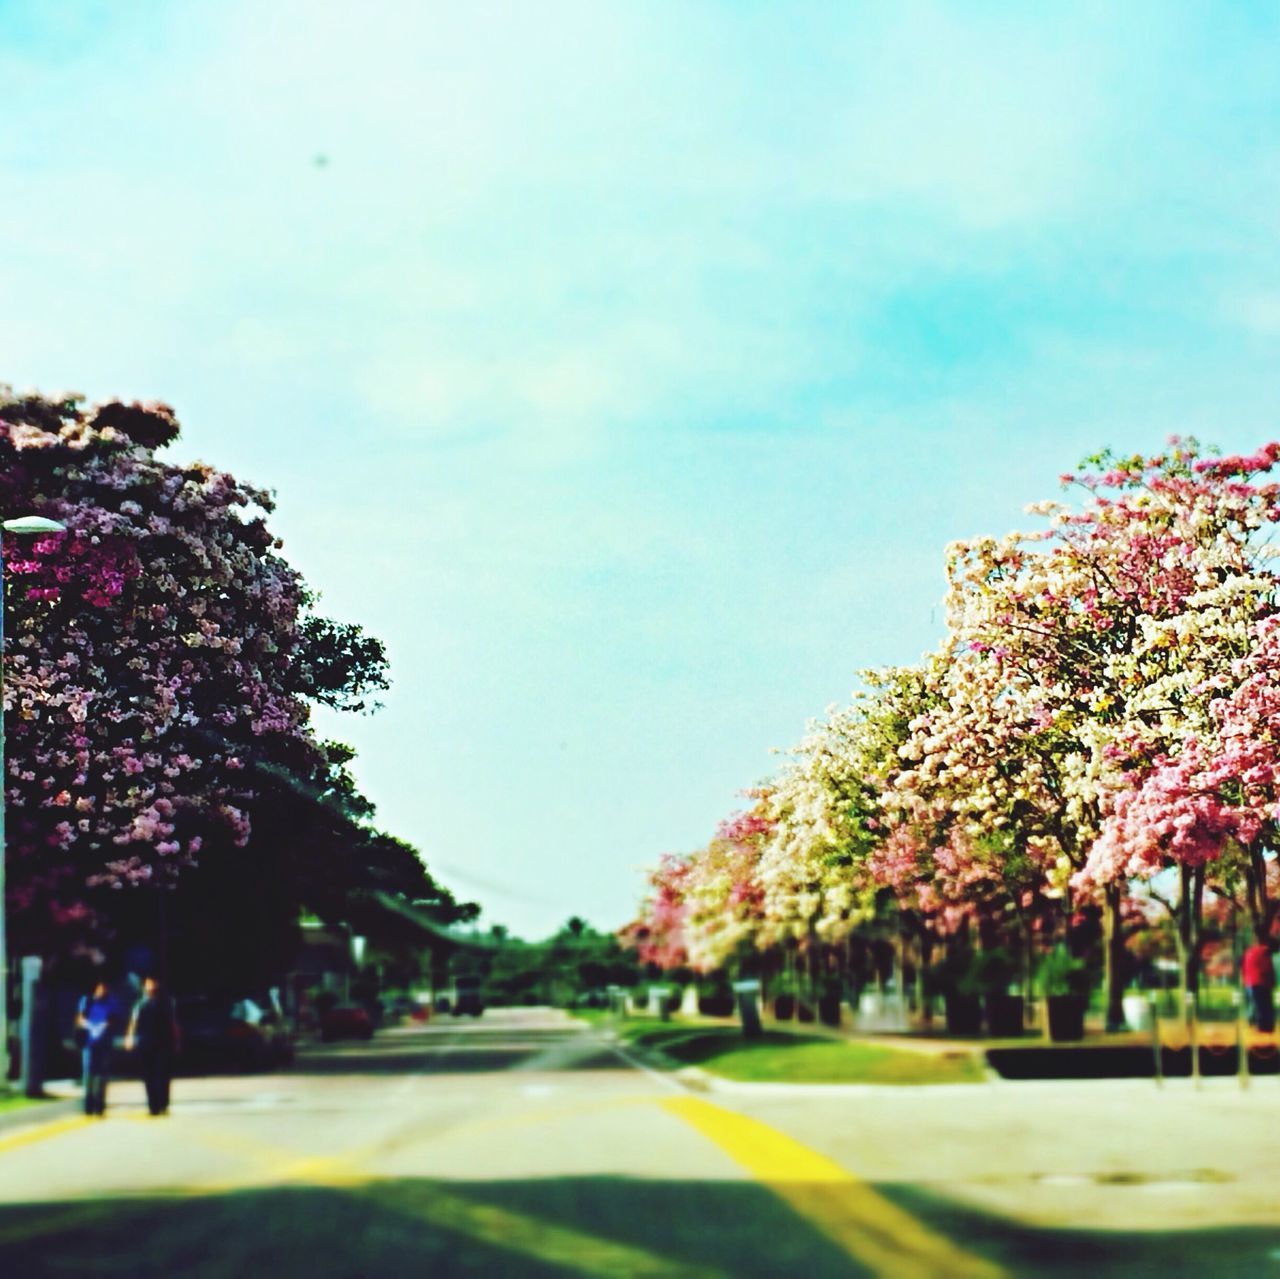 tree, flower, growth, clear sky, sky, road, freshness, nature, the way forward, transportation, beauty in nature, street, park - man made space, outdoors, incidental people, day, blossom, branch, sunlight, diminishing perspective